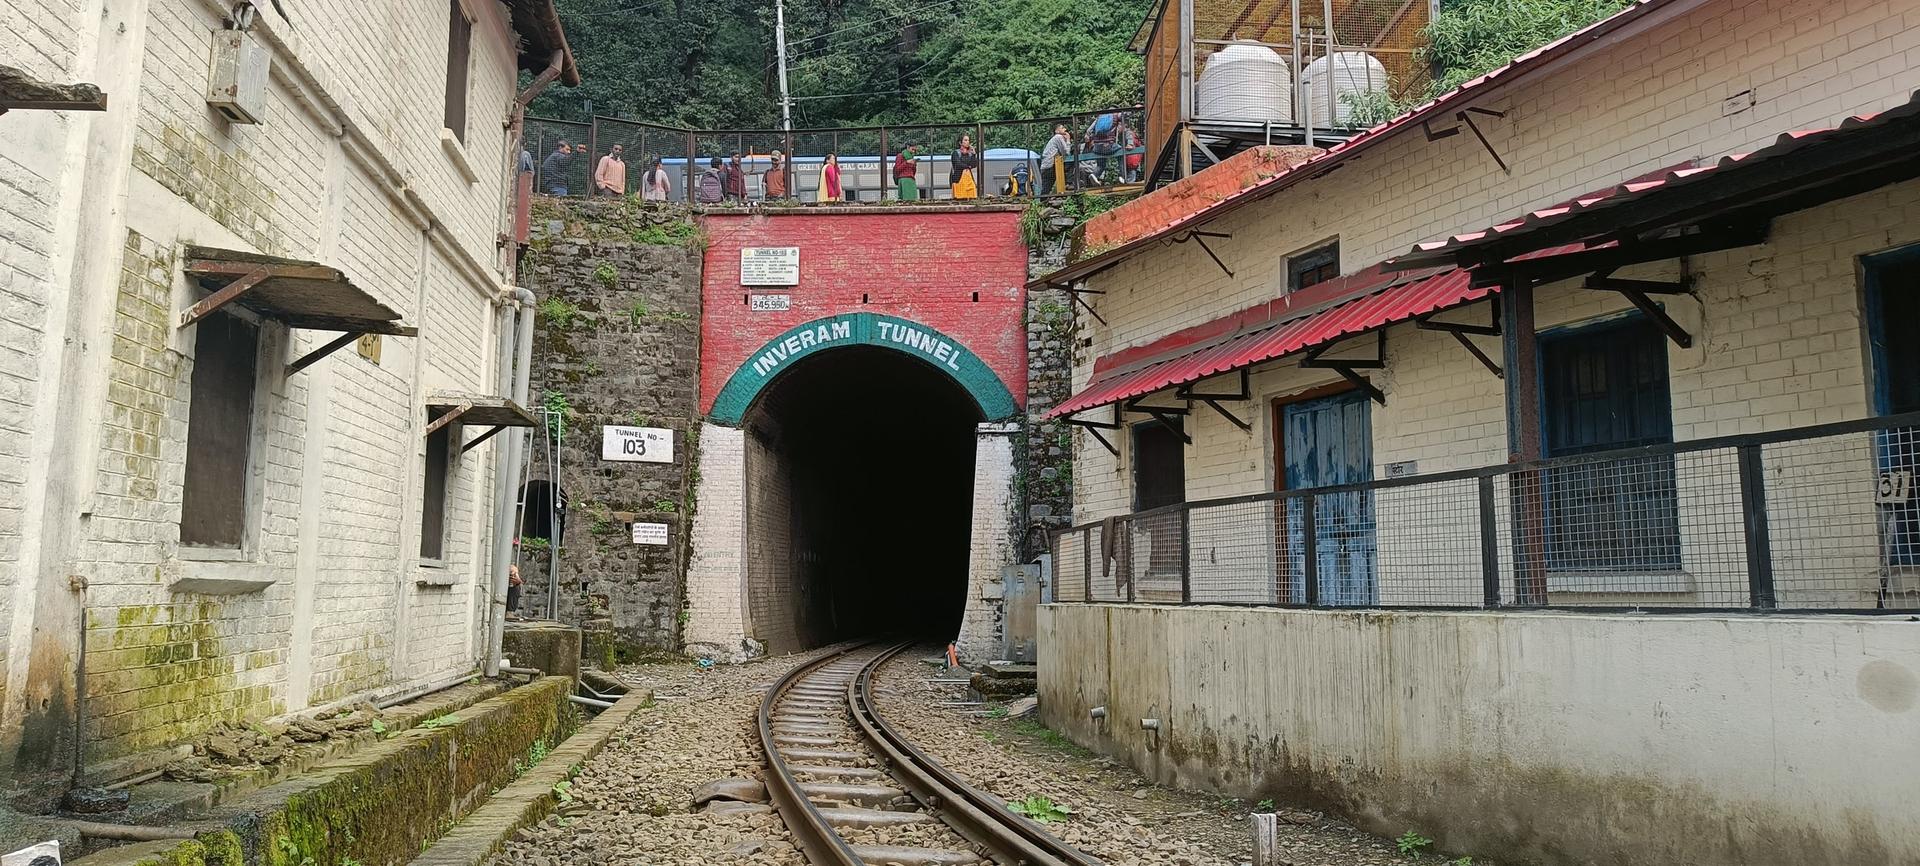 Shimla Tunnel 103, also called Inveram tunnel, is said to be haunted by a kind spirit that belongs to an English gentleman who chats with passersby.